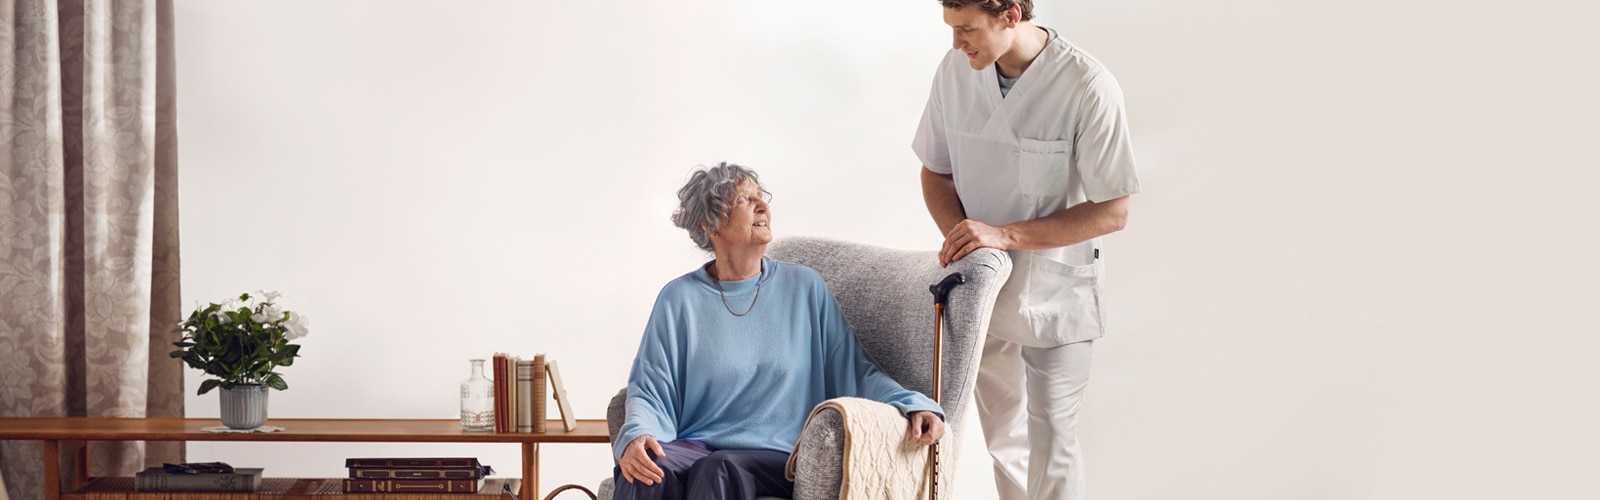 A seated elderly resident talking with a standing professional caregiver in a care home environment 